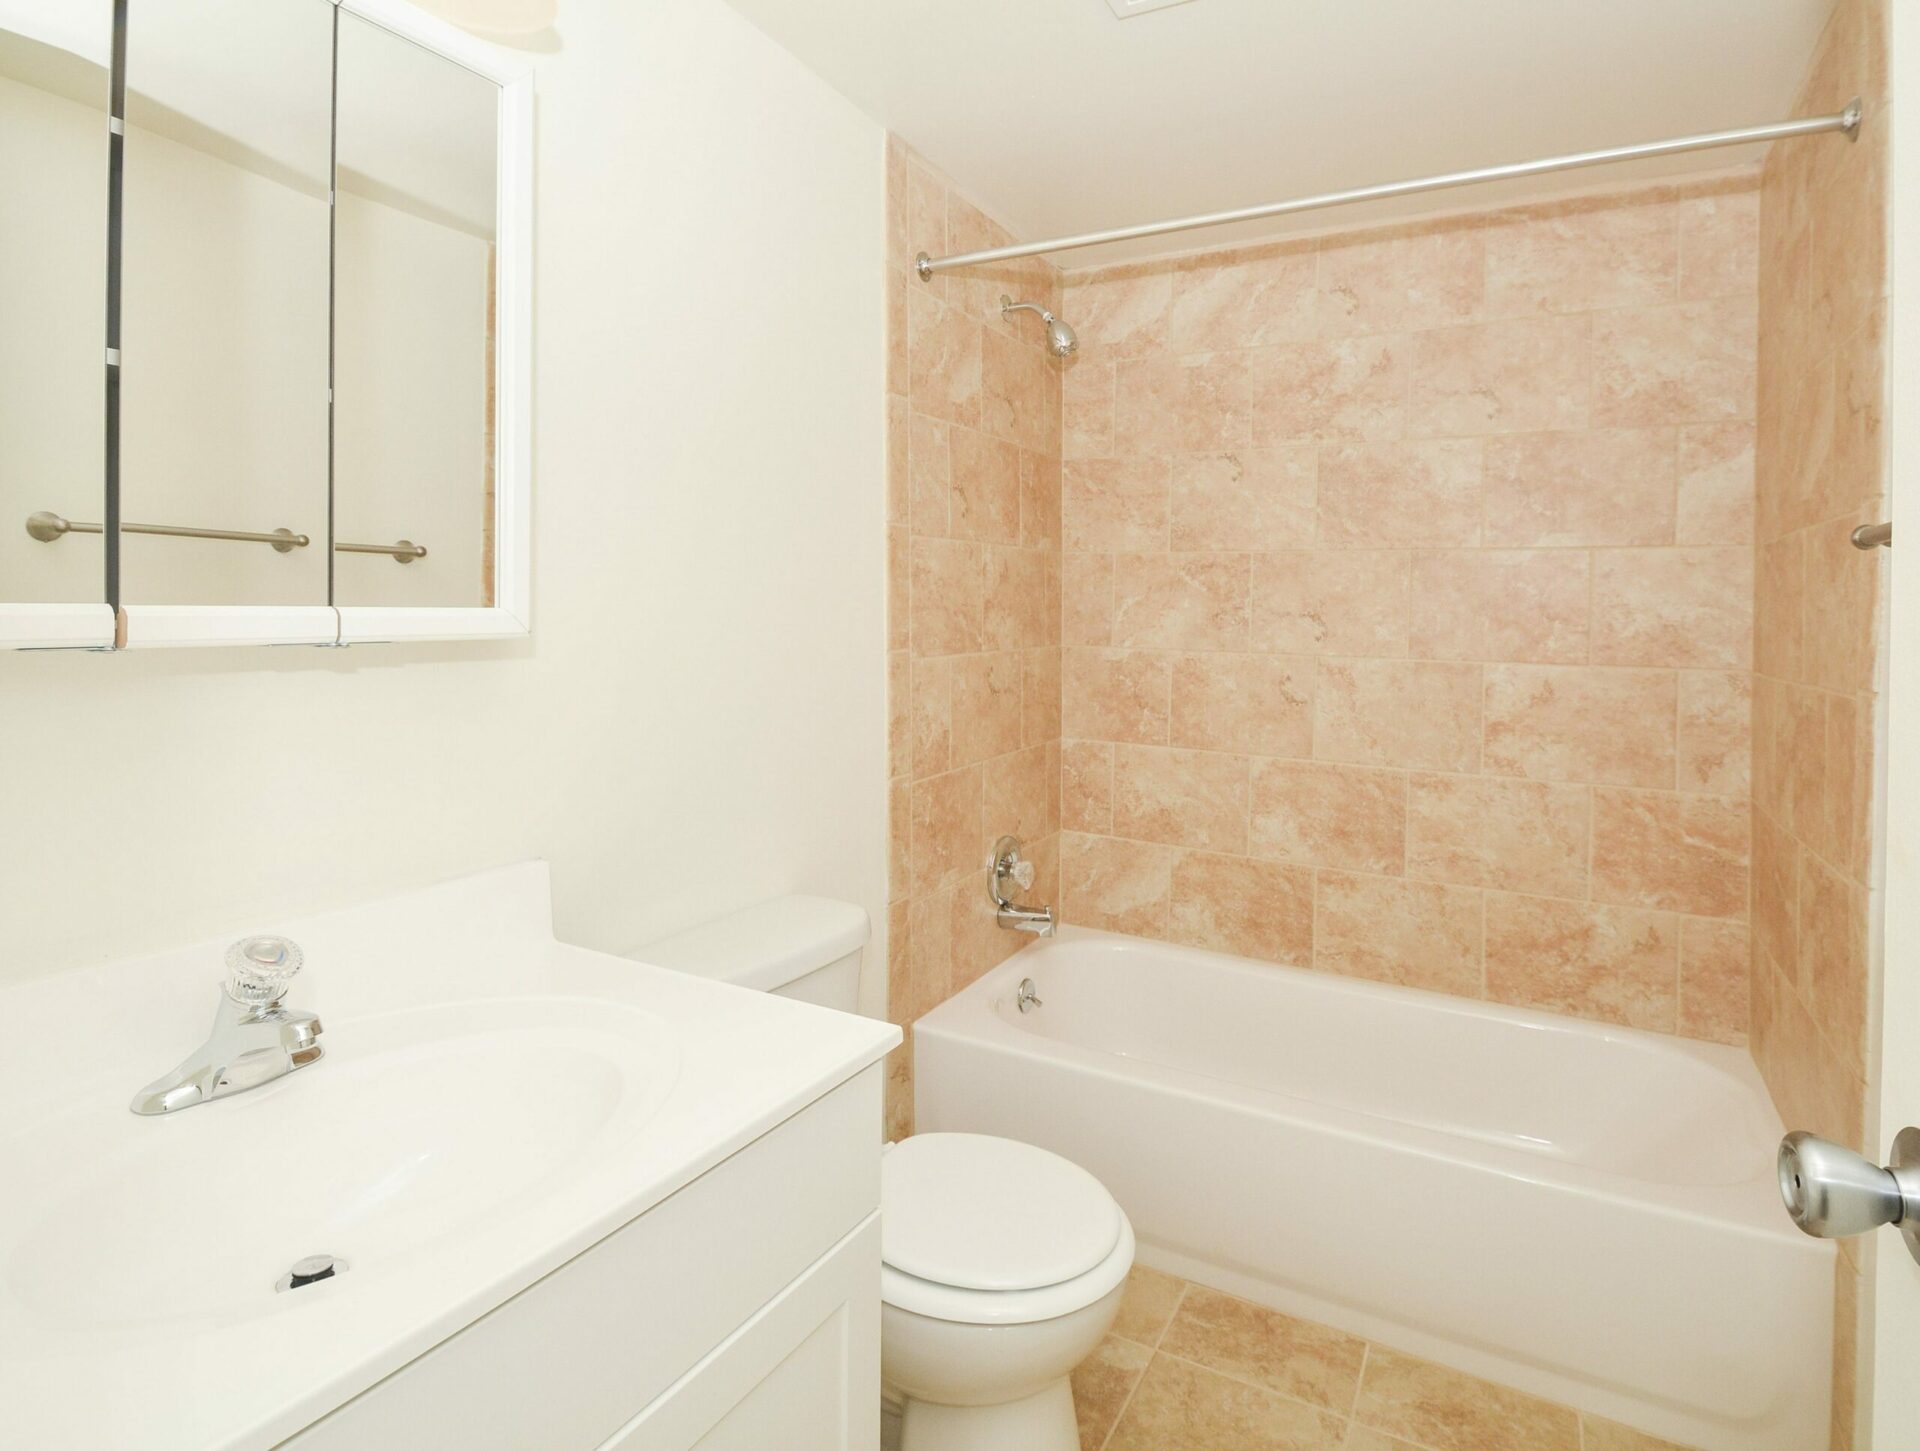 A tiled bathroom with a large tub and shower at Valley Forge Suites